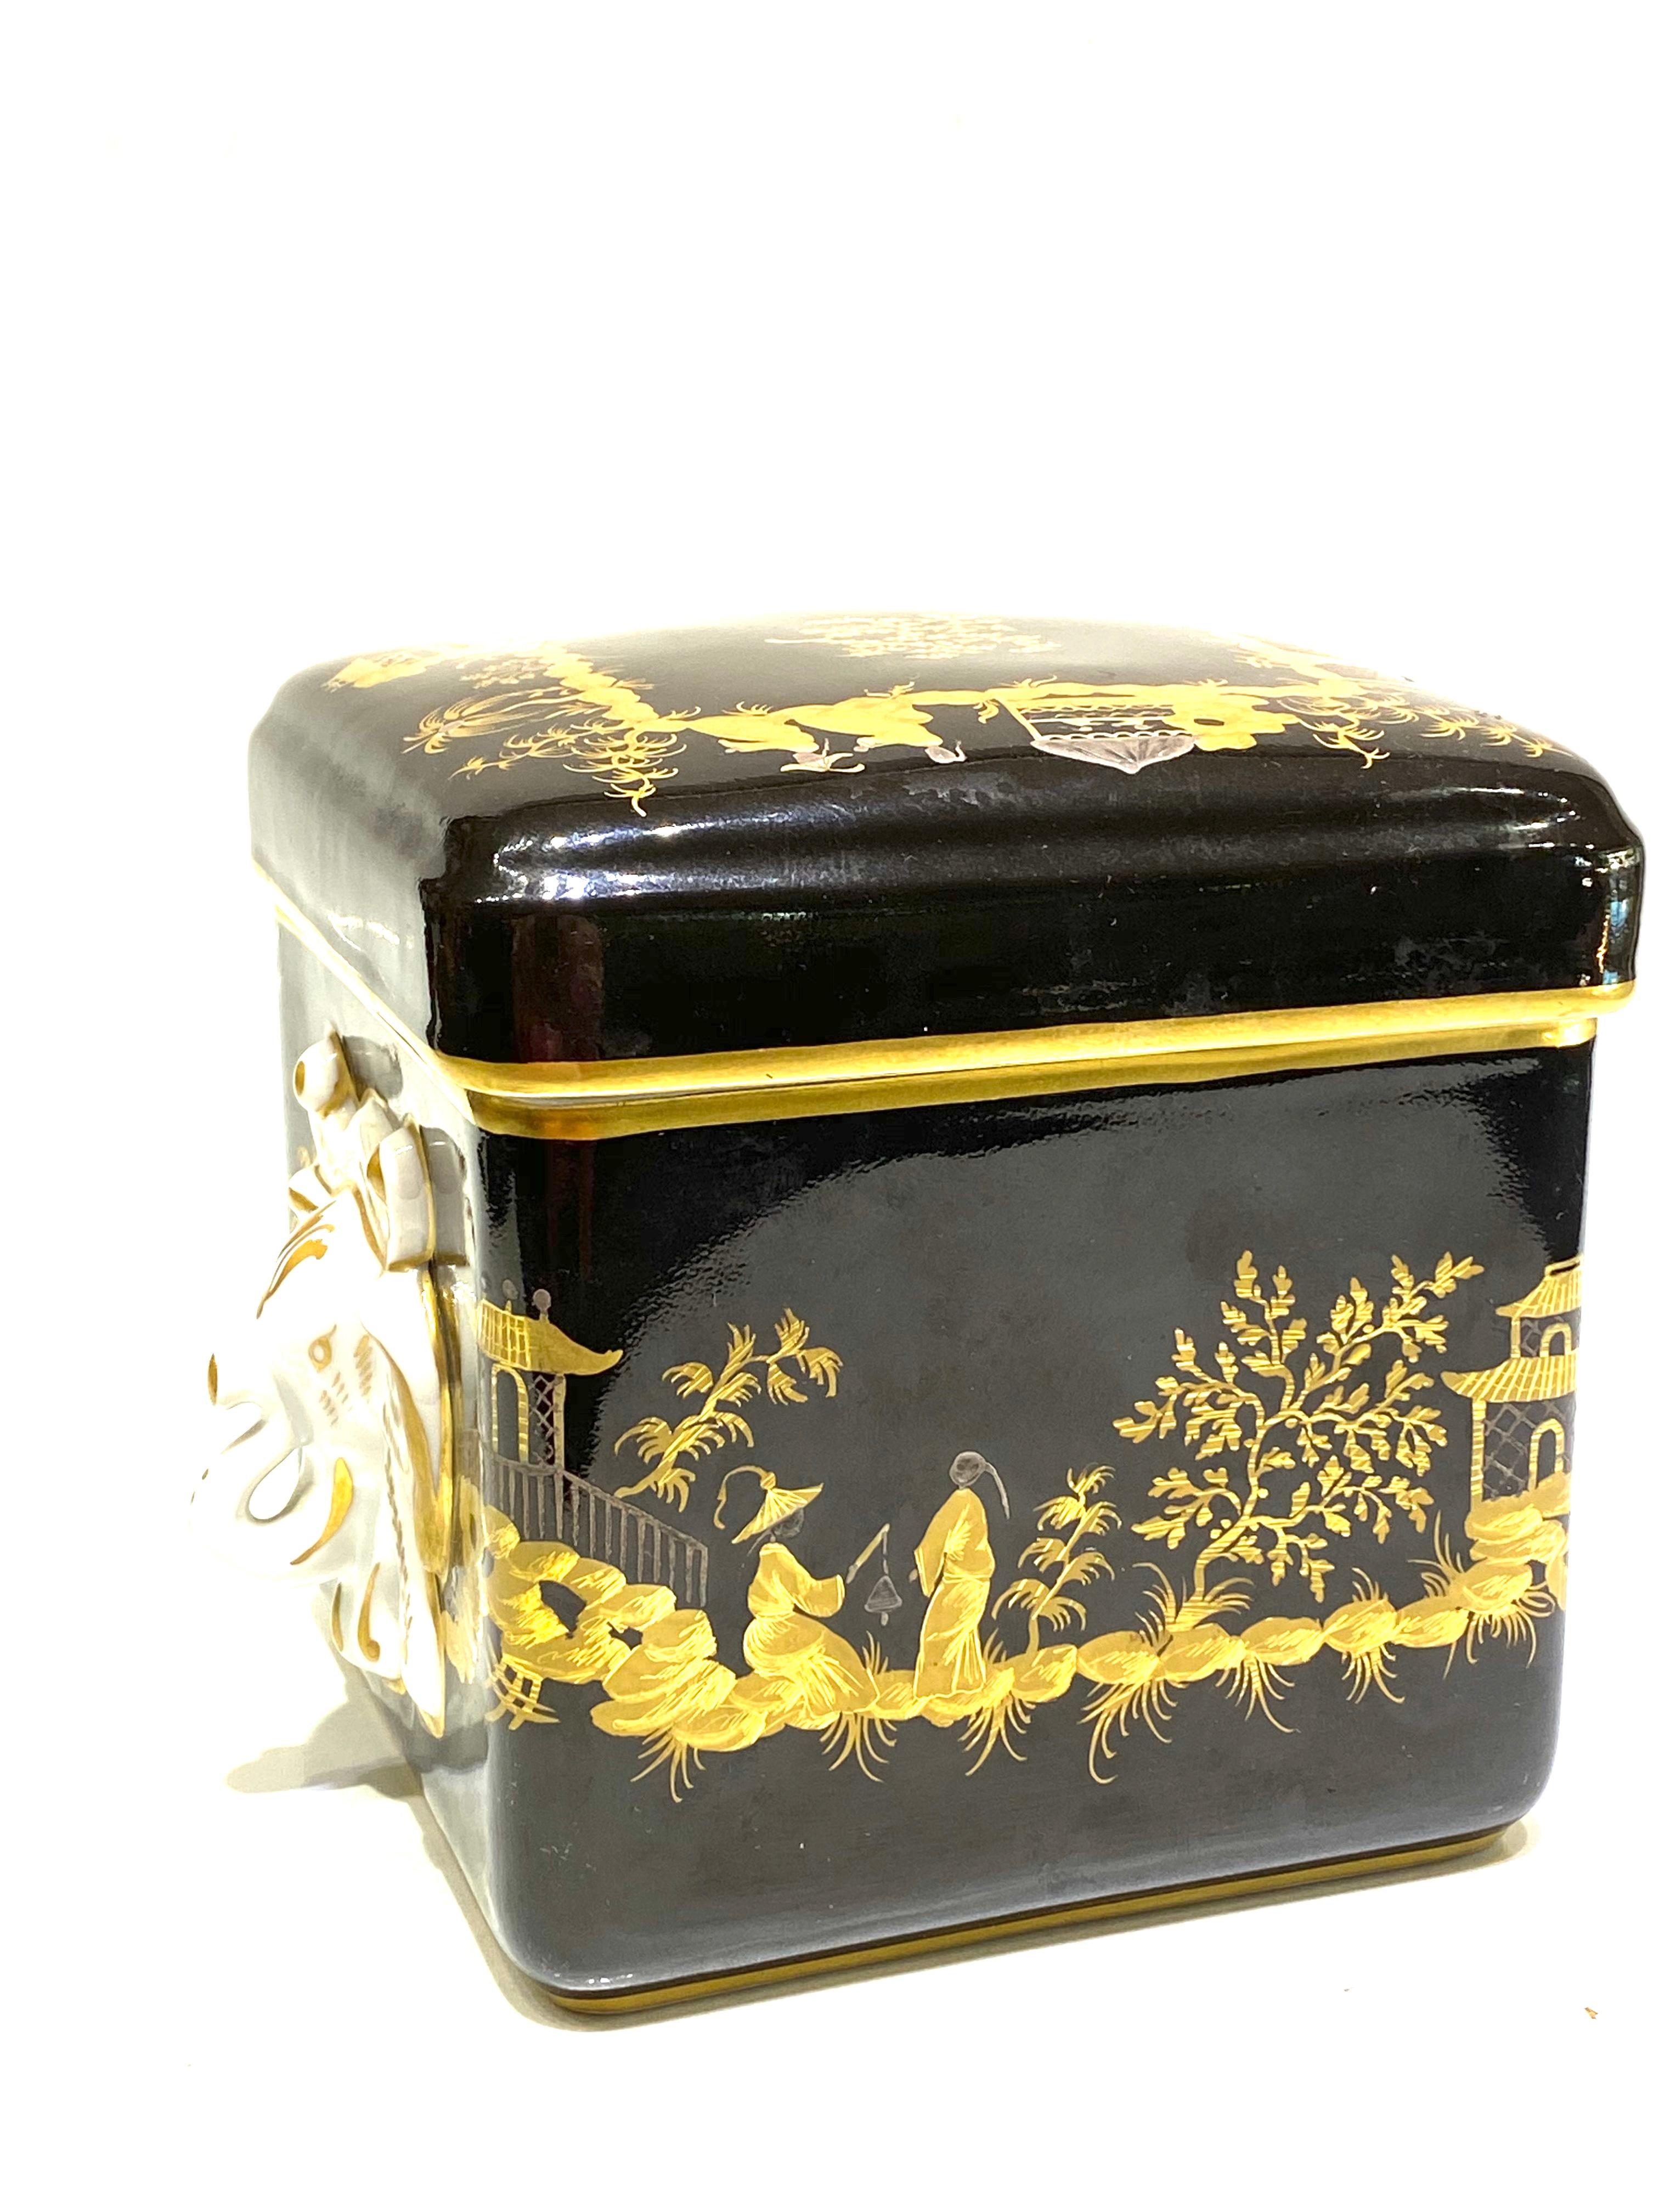 Limoges TIFFANY & Co French Chinoise Hand Painted Percaline Decorative Box

Product details:
Vintage 
Black and gold hand painted over percaline
Featuring chinoise motif with 3D elephant on two sides 
Made in France 
Total weight is 1483.7 grams 
 